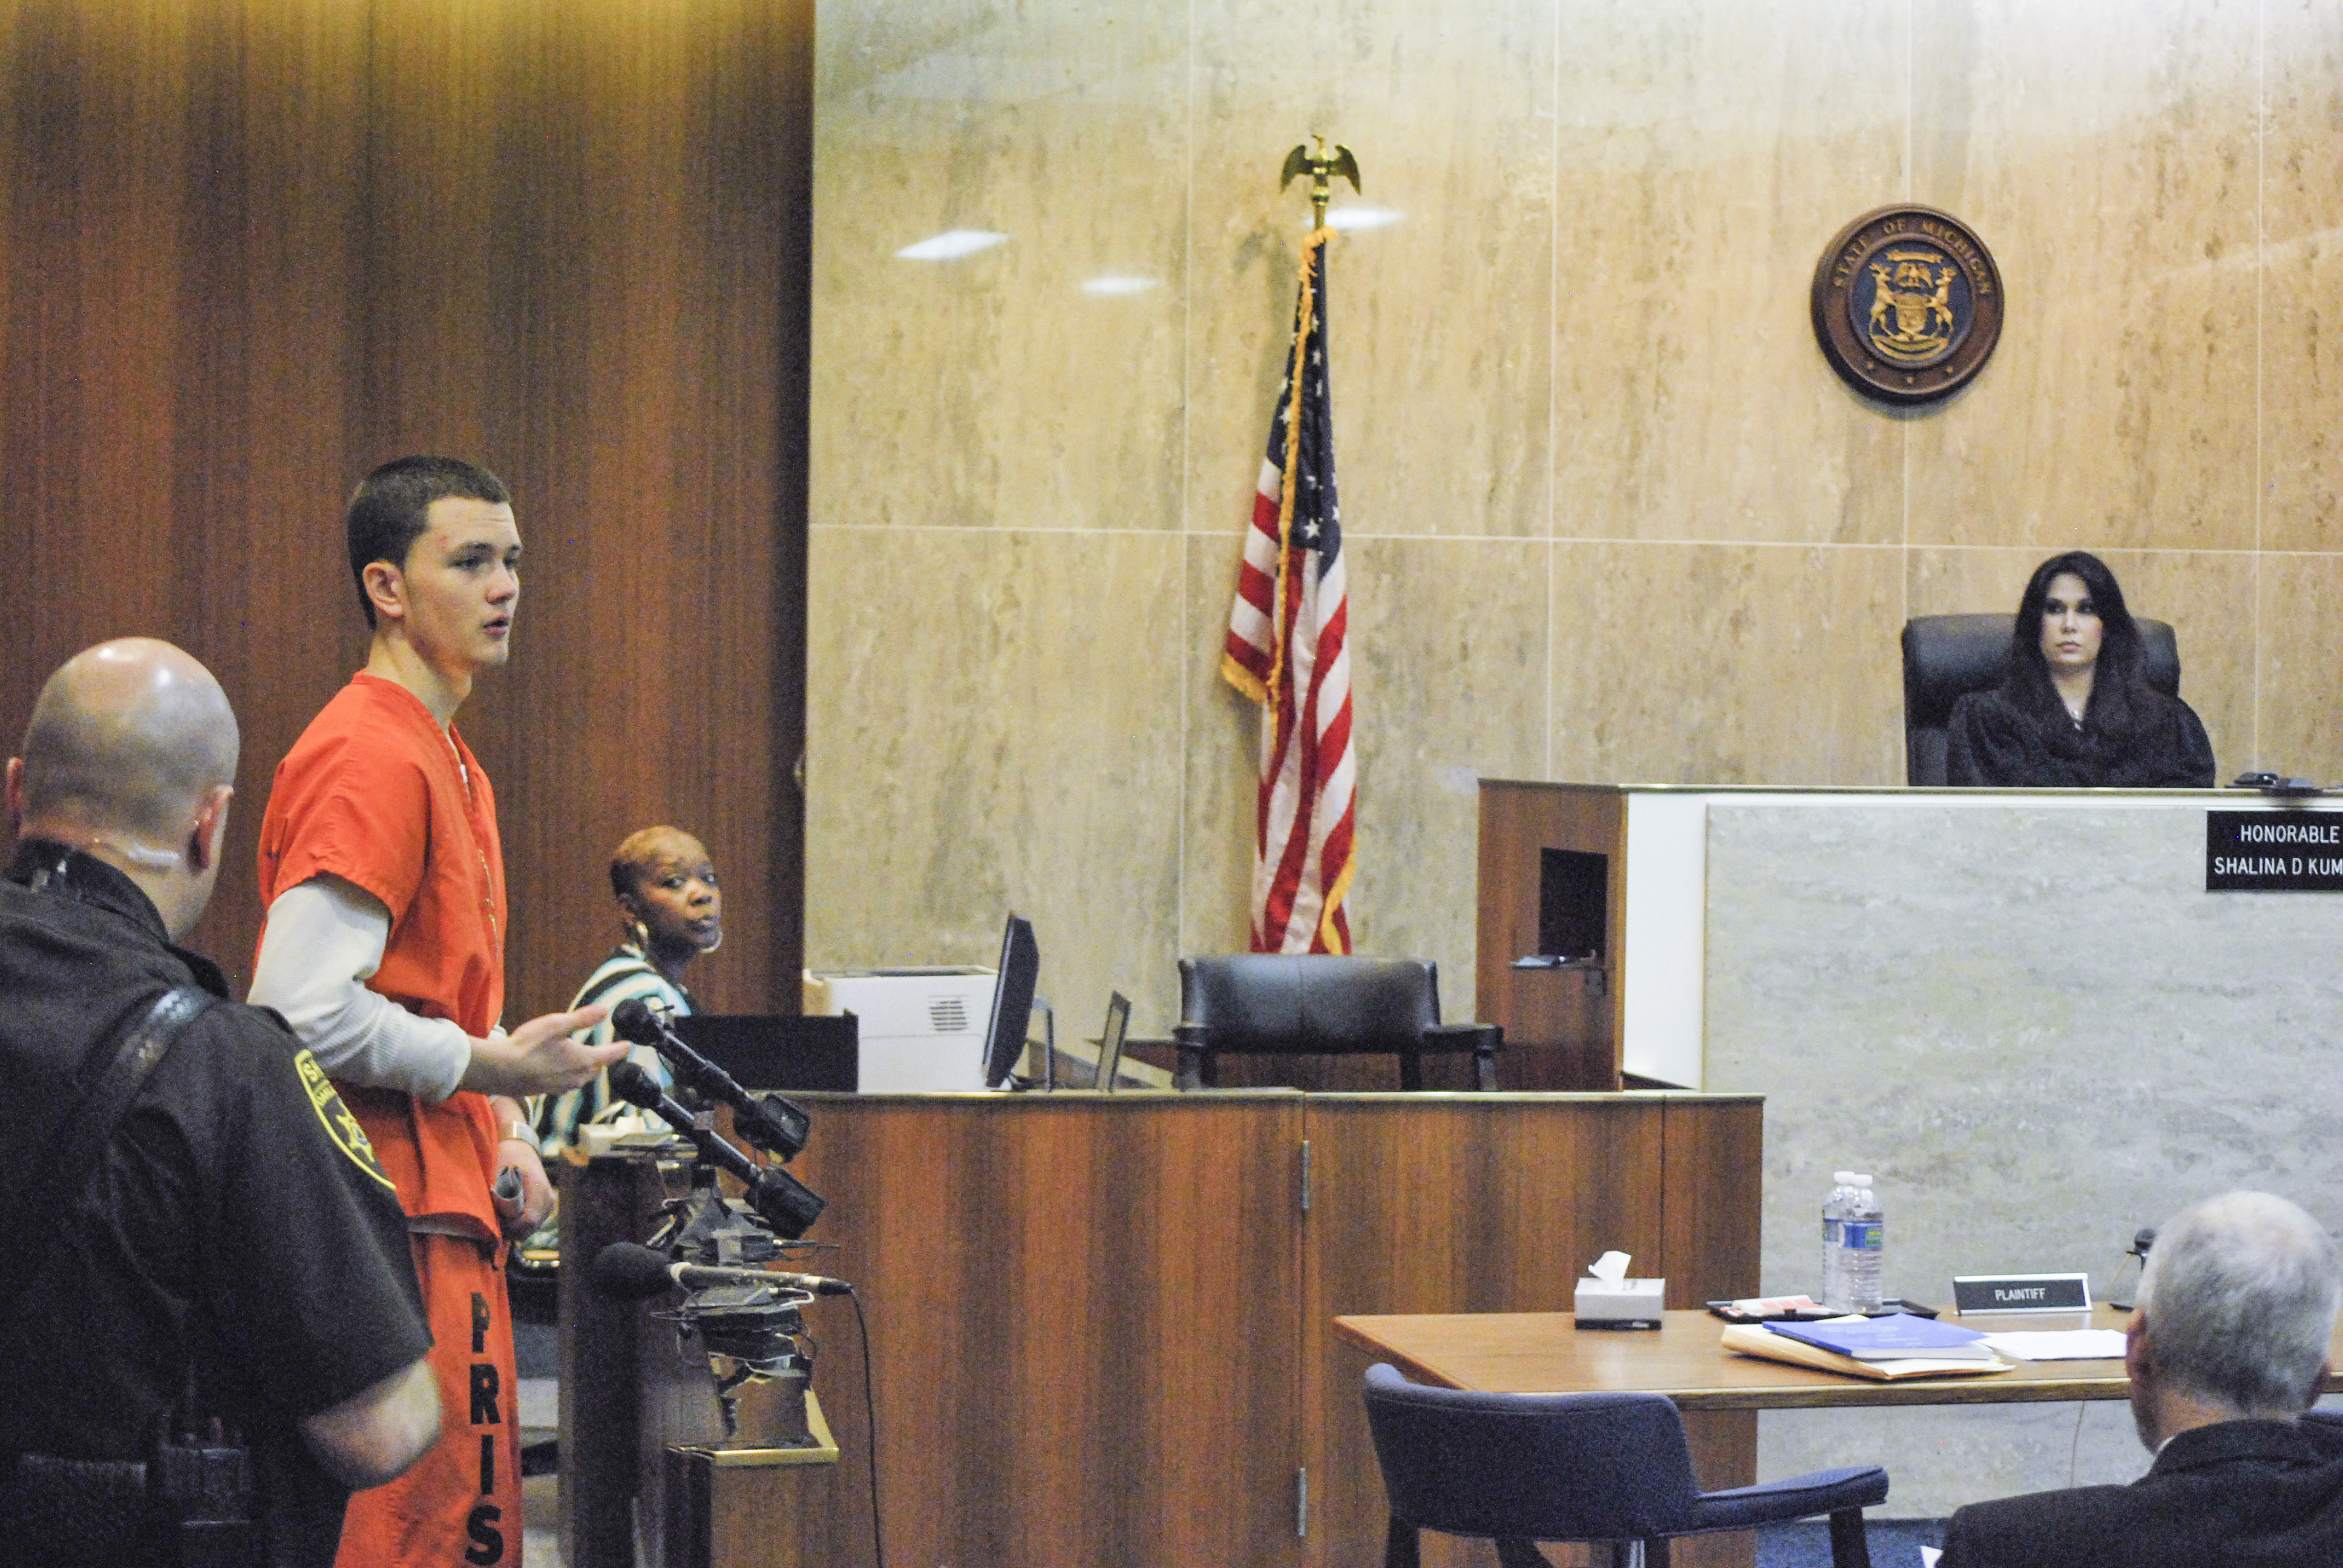 Mitchell Young appears in an Oakland County Circuit courtroom for the sentencing on July 24, 2013. Cipriano and Young made statements about the trial and expressed their condolences to the victims' families. The April 2012 brutal baseball bat attack killed Cipriano's father and seriously injured his mother and brother. (credit: George Fox/CBS 62)